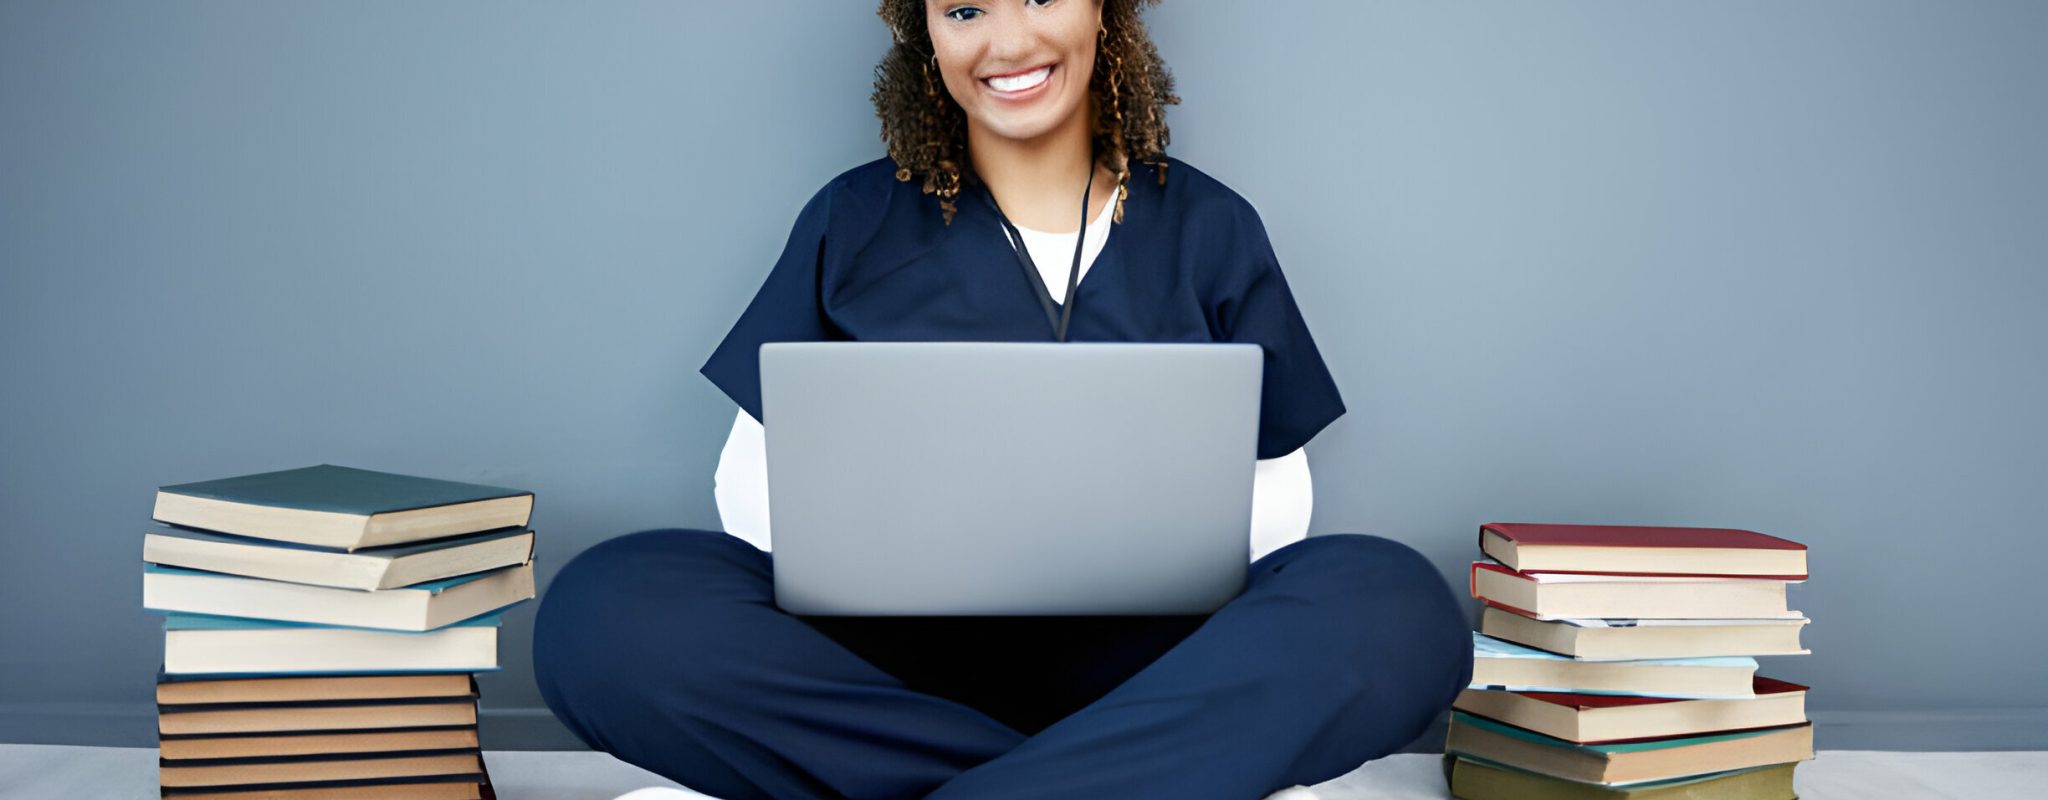 A healthcare professional smiling, working on a laptop with stacks of books beside her